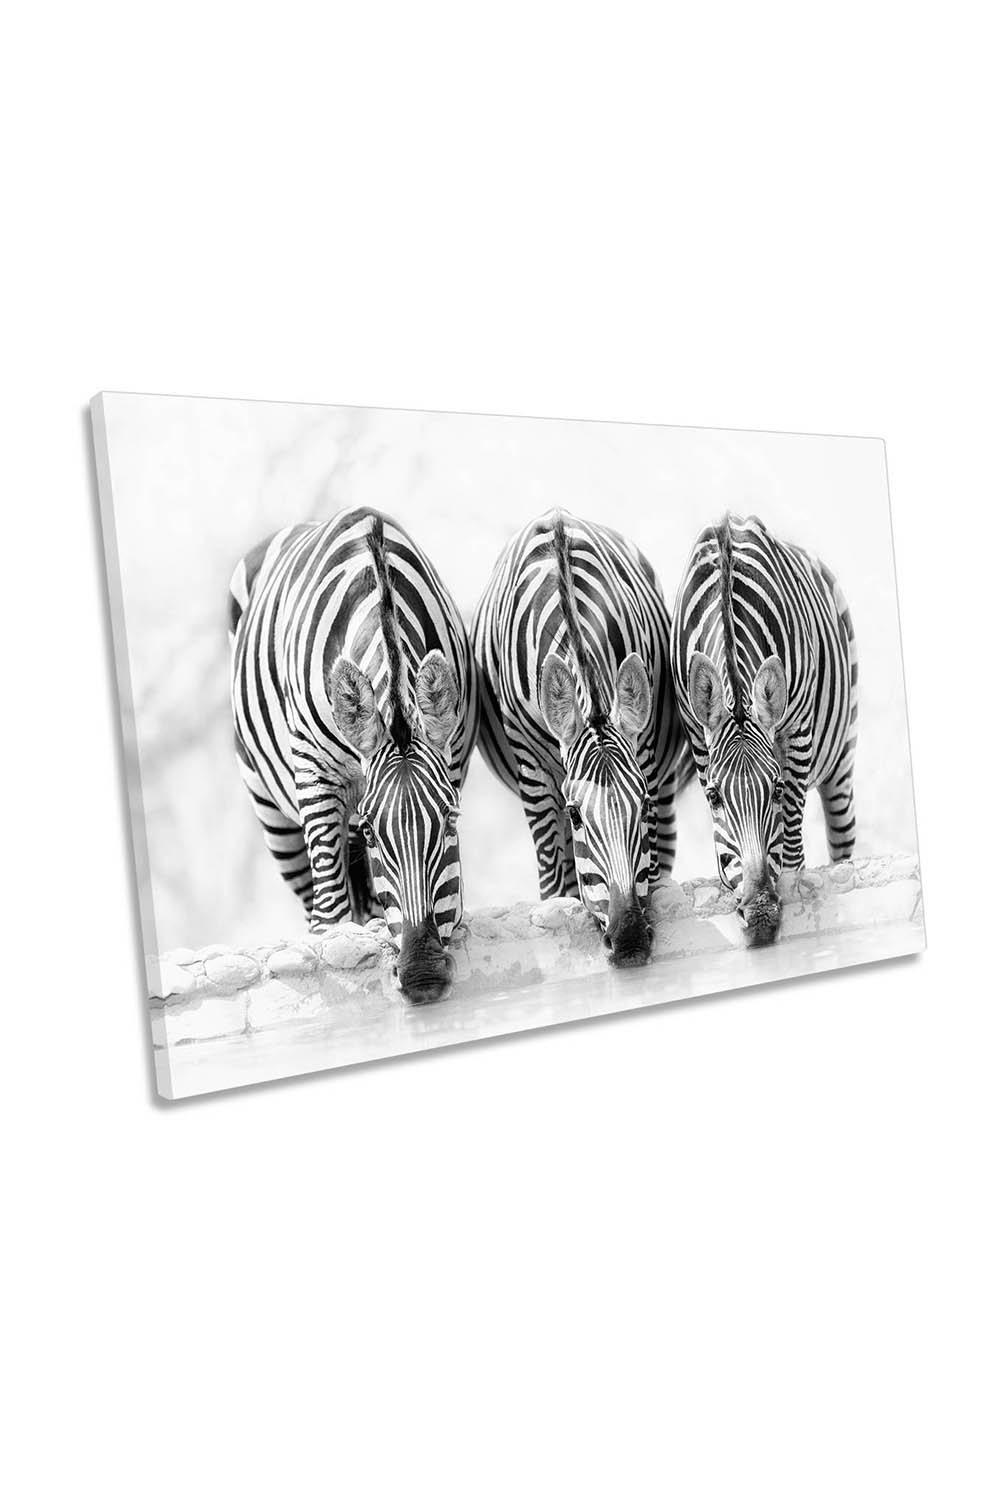 Drinking Zebras Black and White Waterhole Canvas Wall Art Picture Print